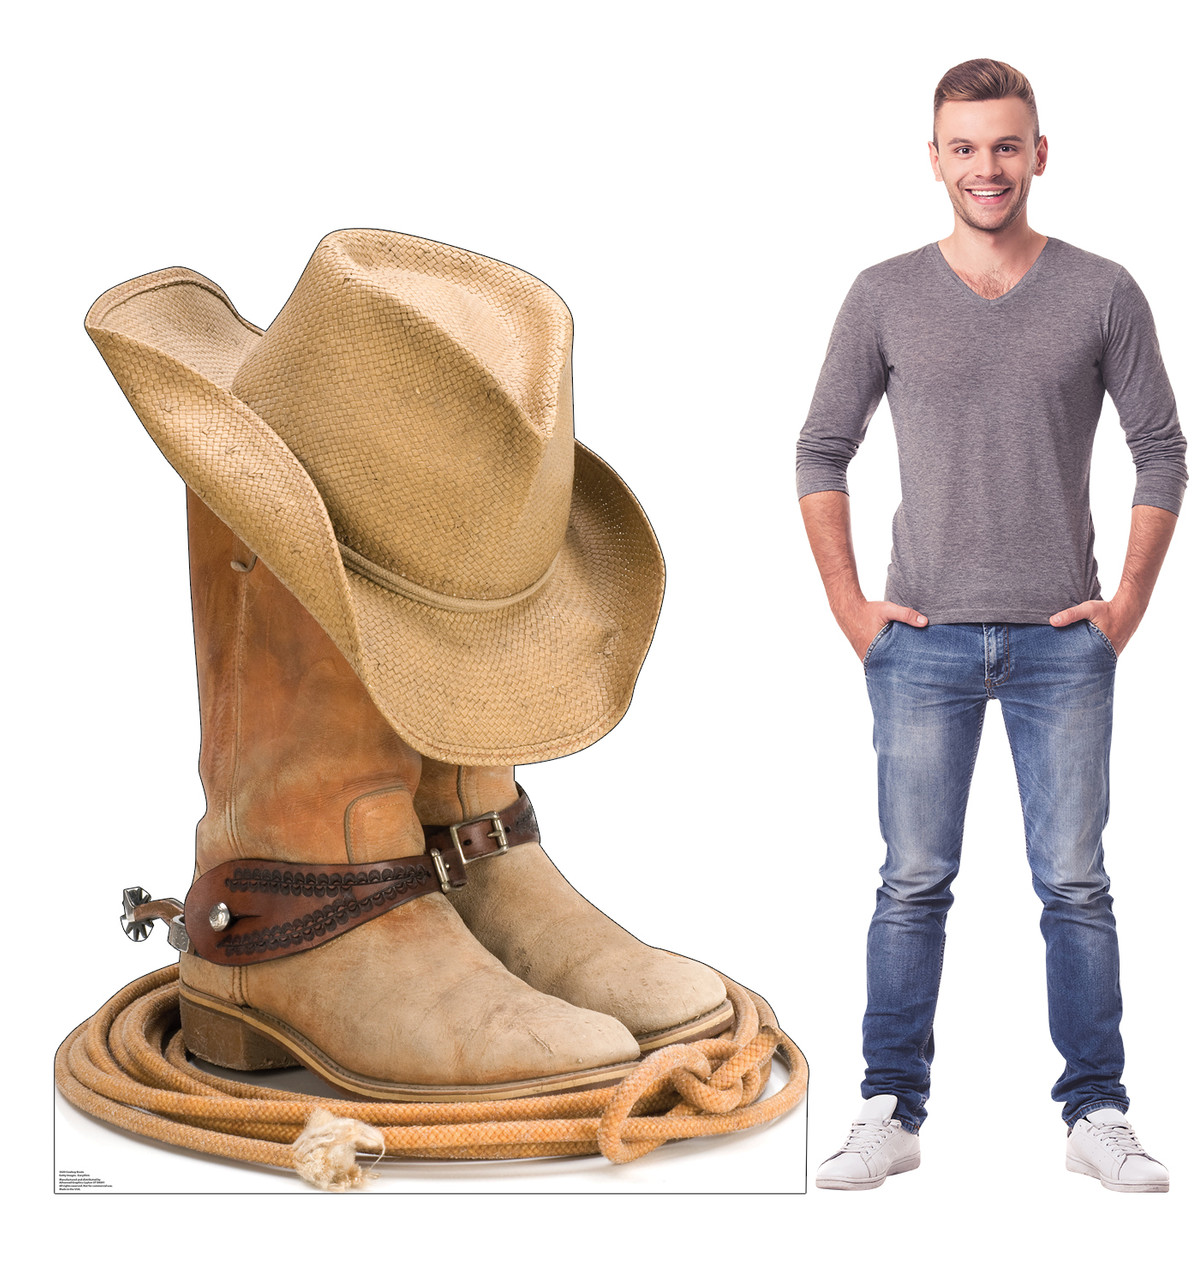 Life-size cardboard standee of Cowboy Boots Lifesize